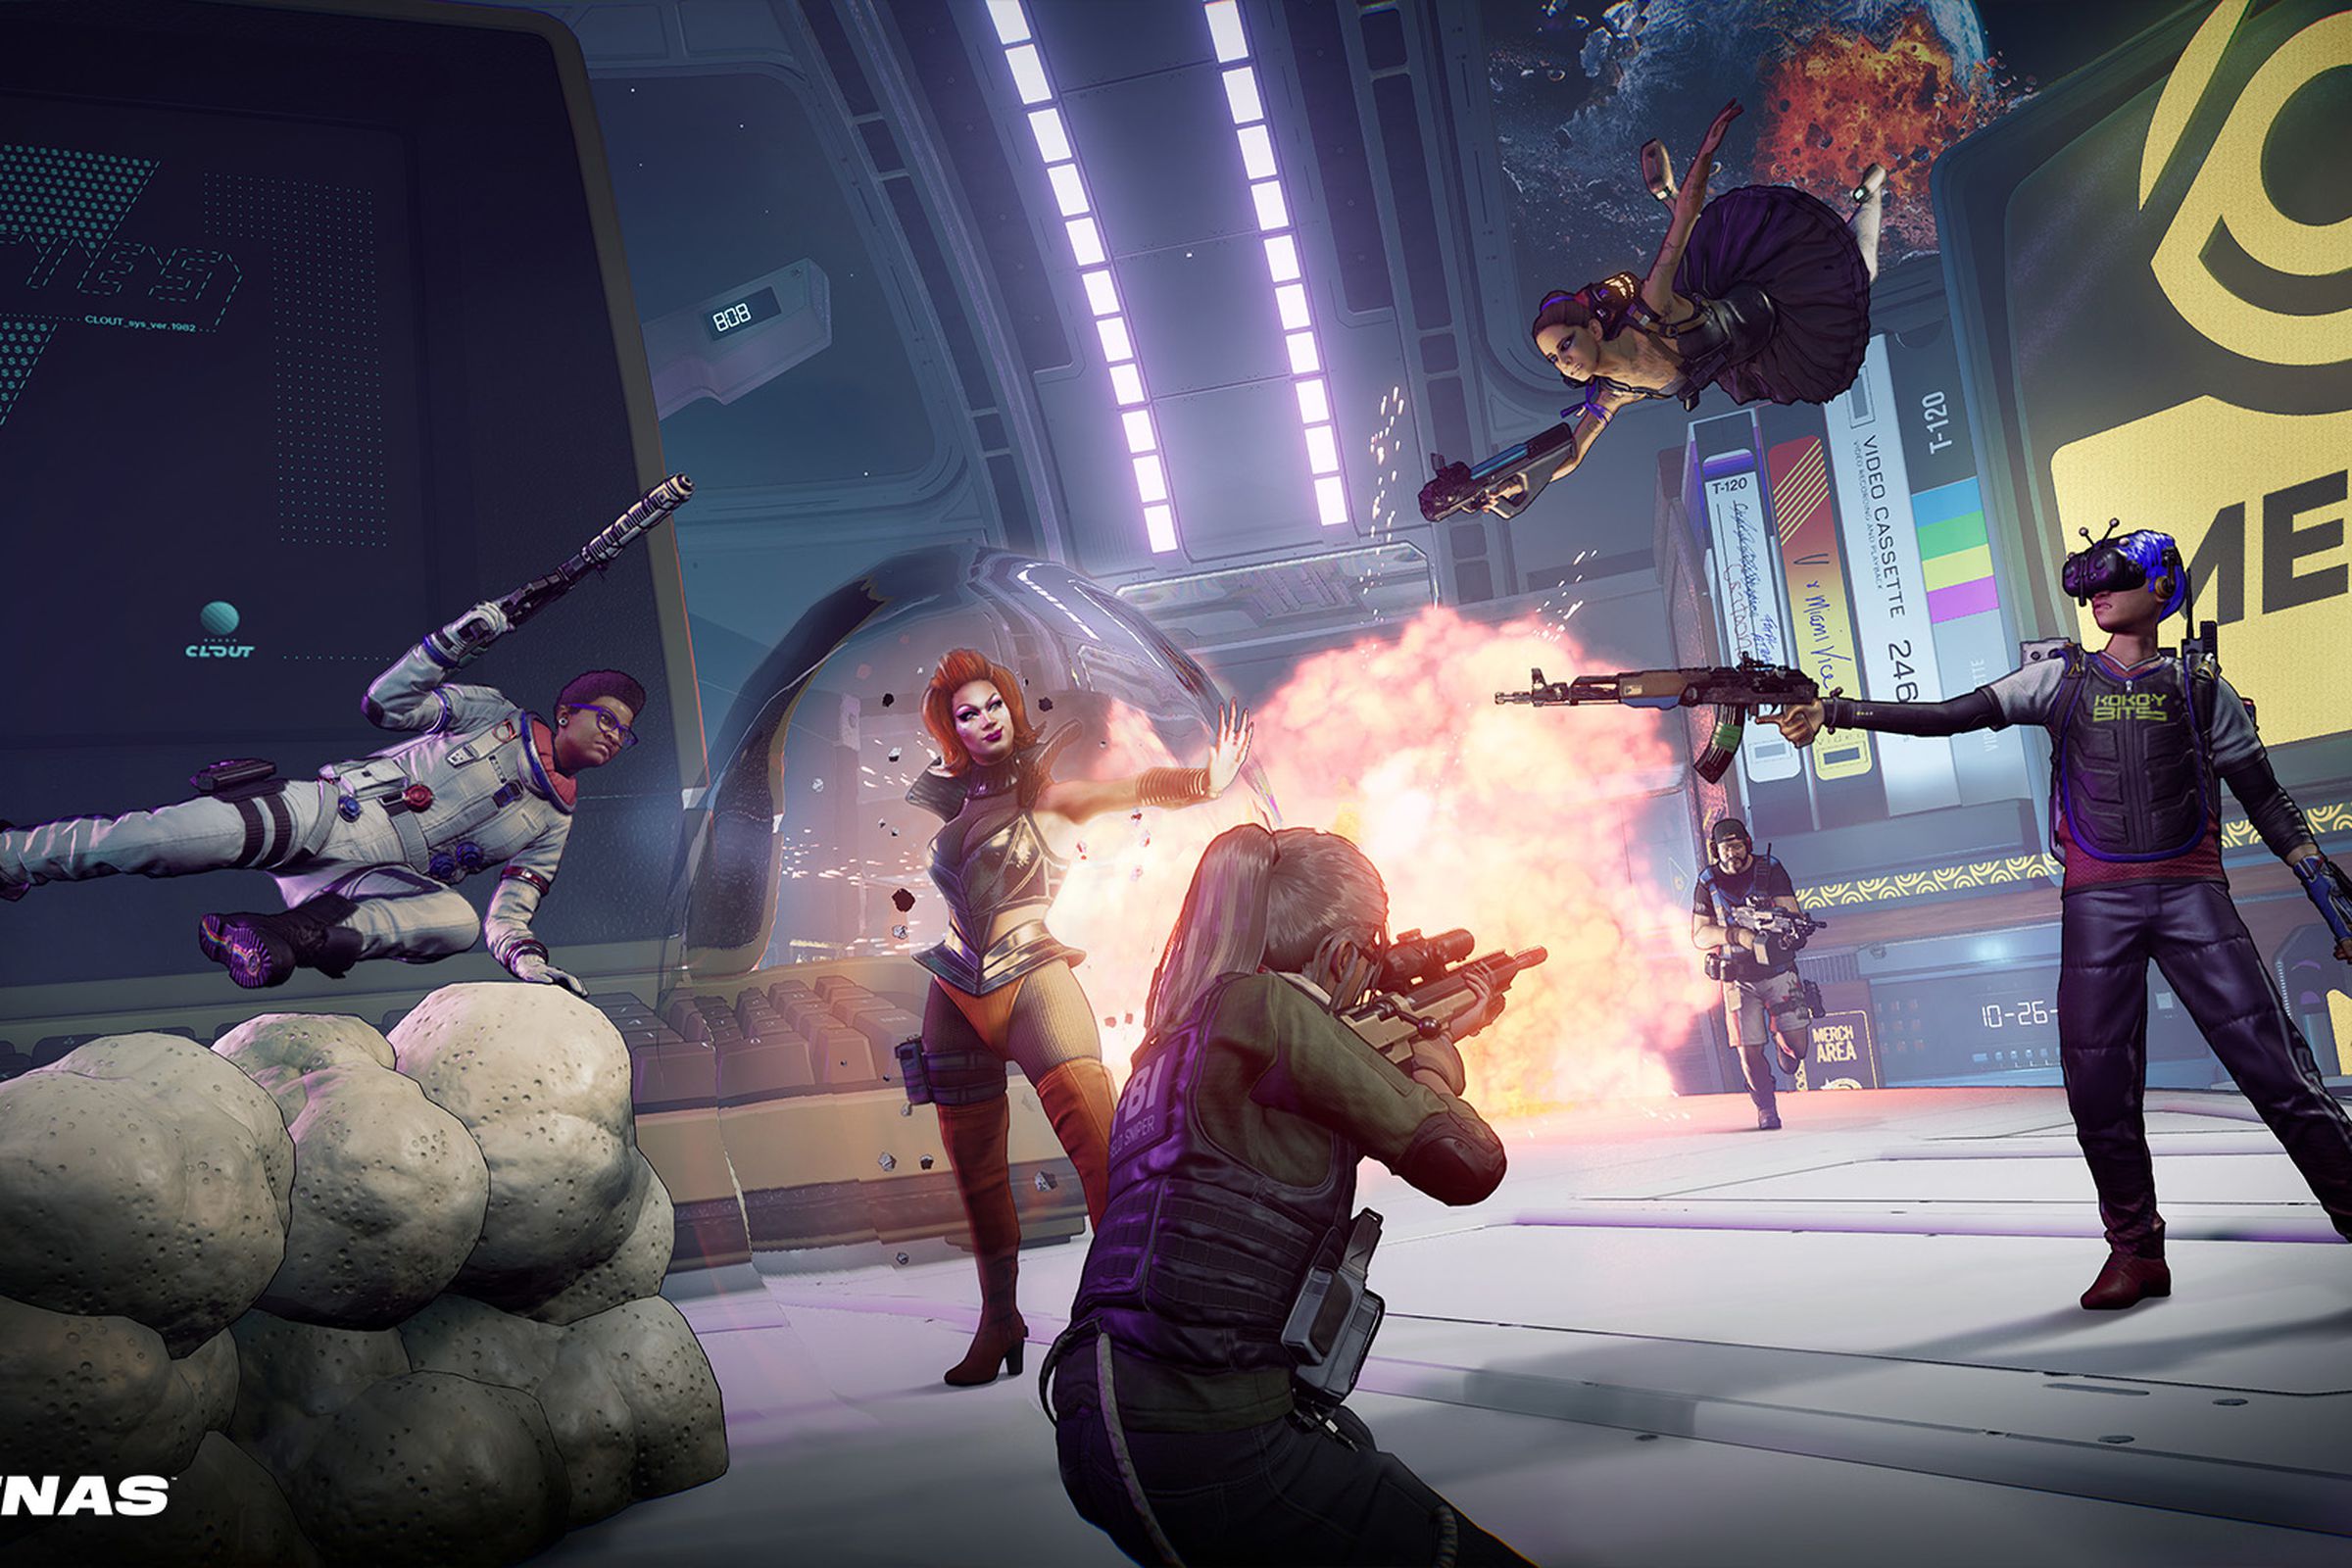 Screenshot from Hyenas featuring a group of mercenaries fighting in a zero-gravity mall arena.